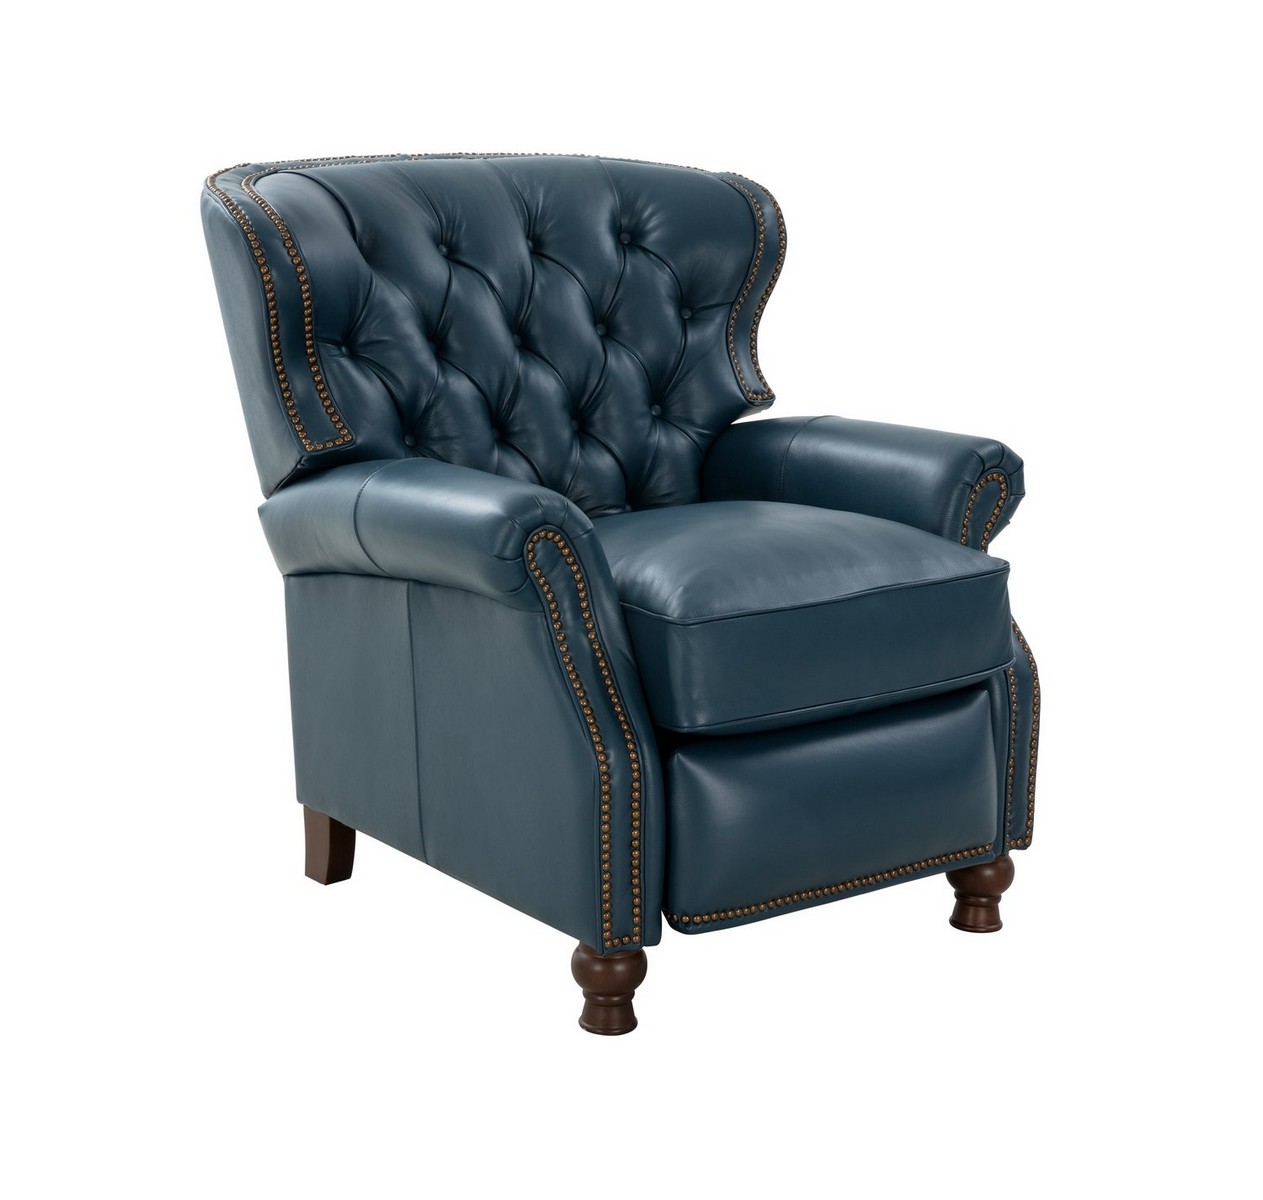 Barcalounger Presidential Recliner Chair - Prestin Yale Blue/All Leather